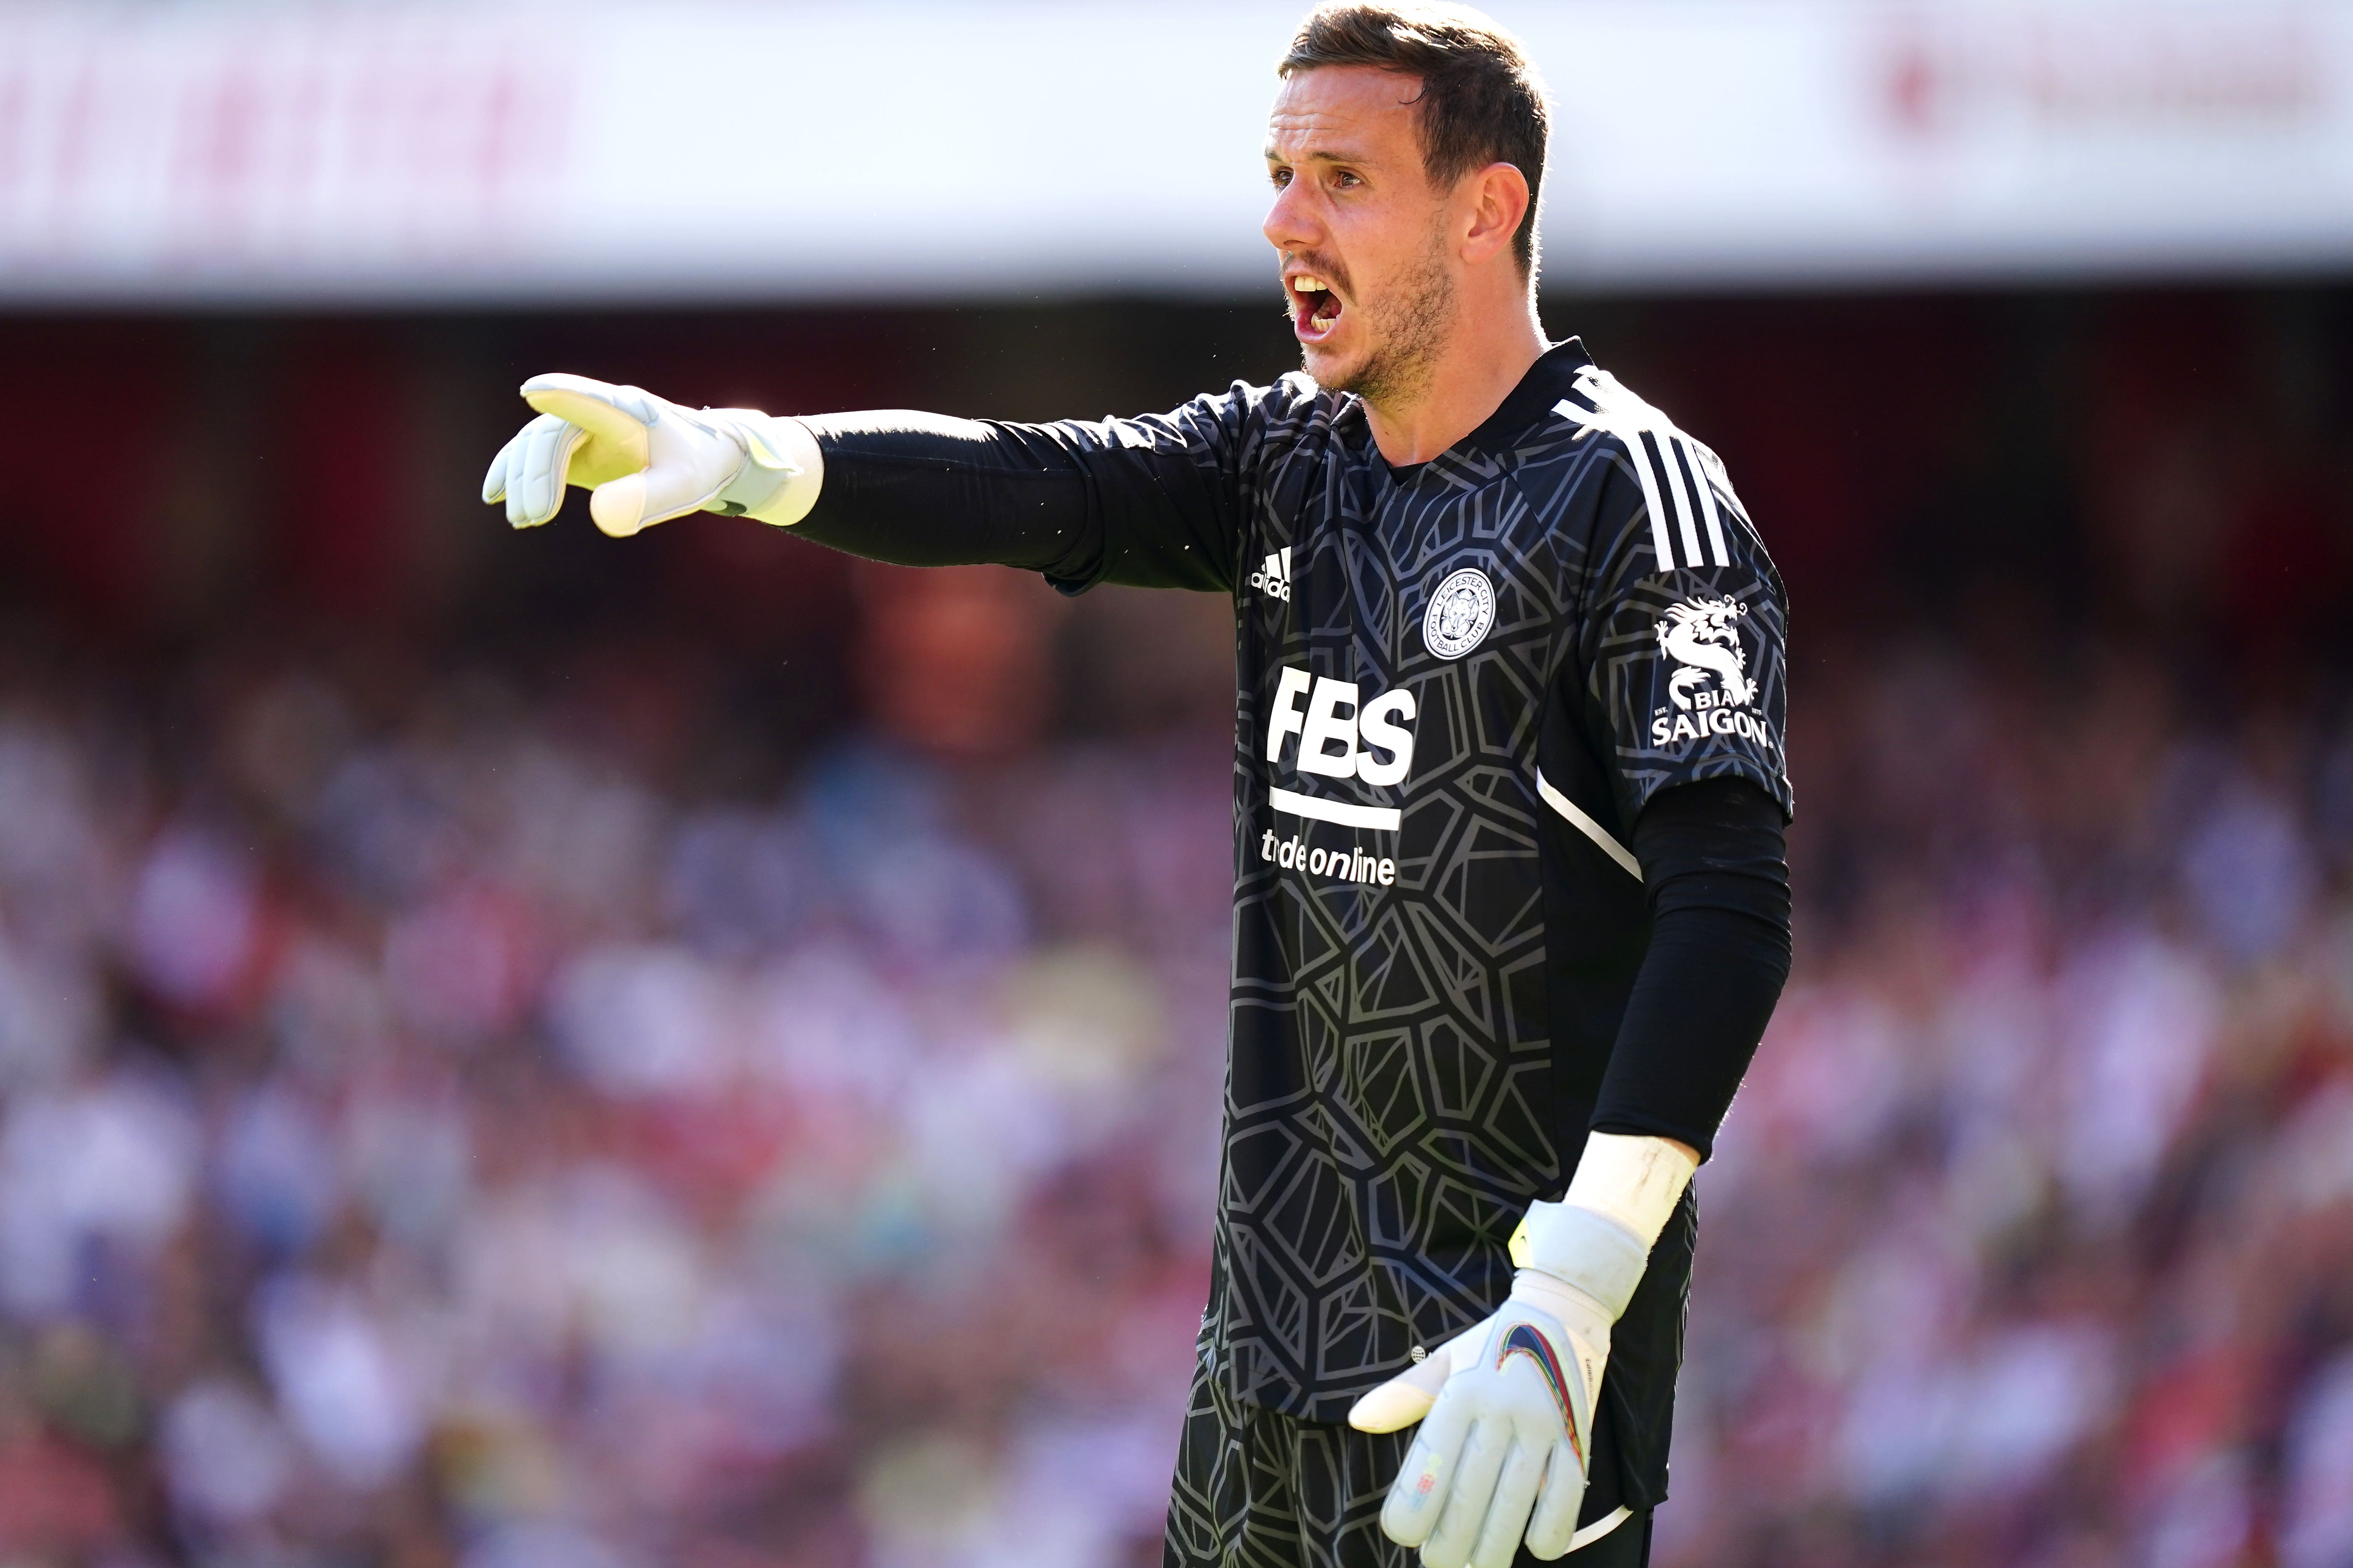 Leicester goalkeeper Danny Ward has kept three clean sheets in his last four games. (Mike Egerton/PA)